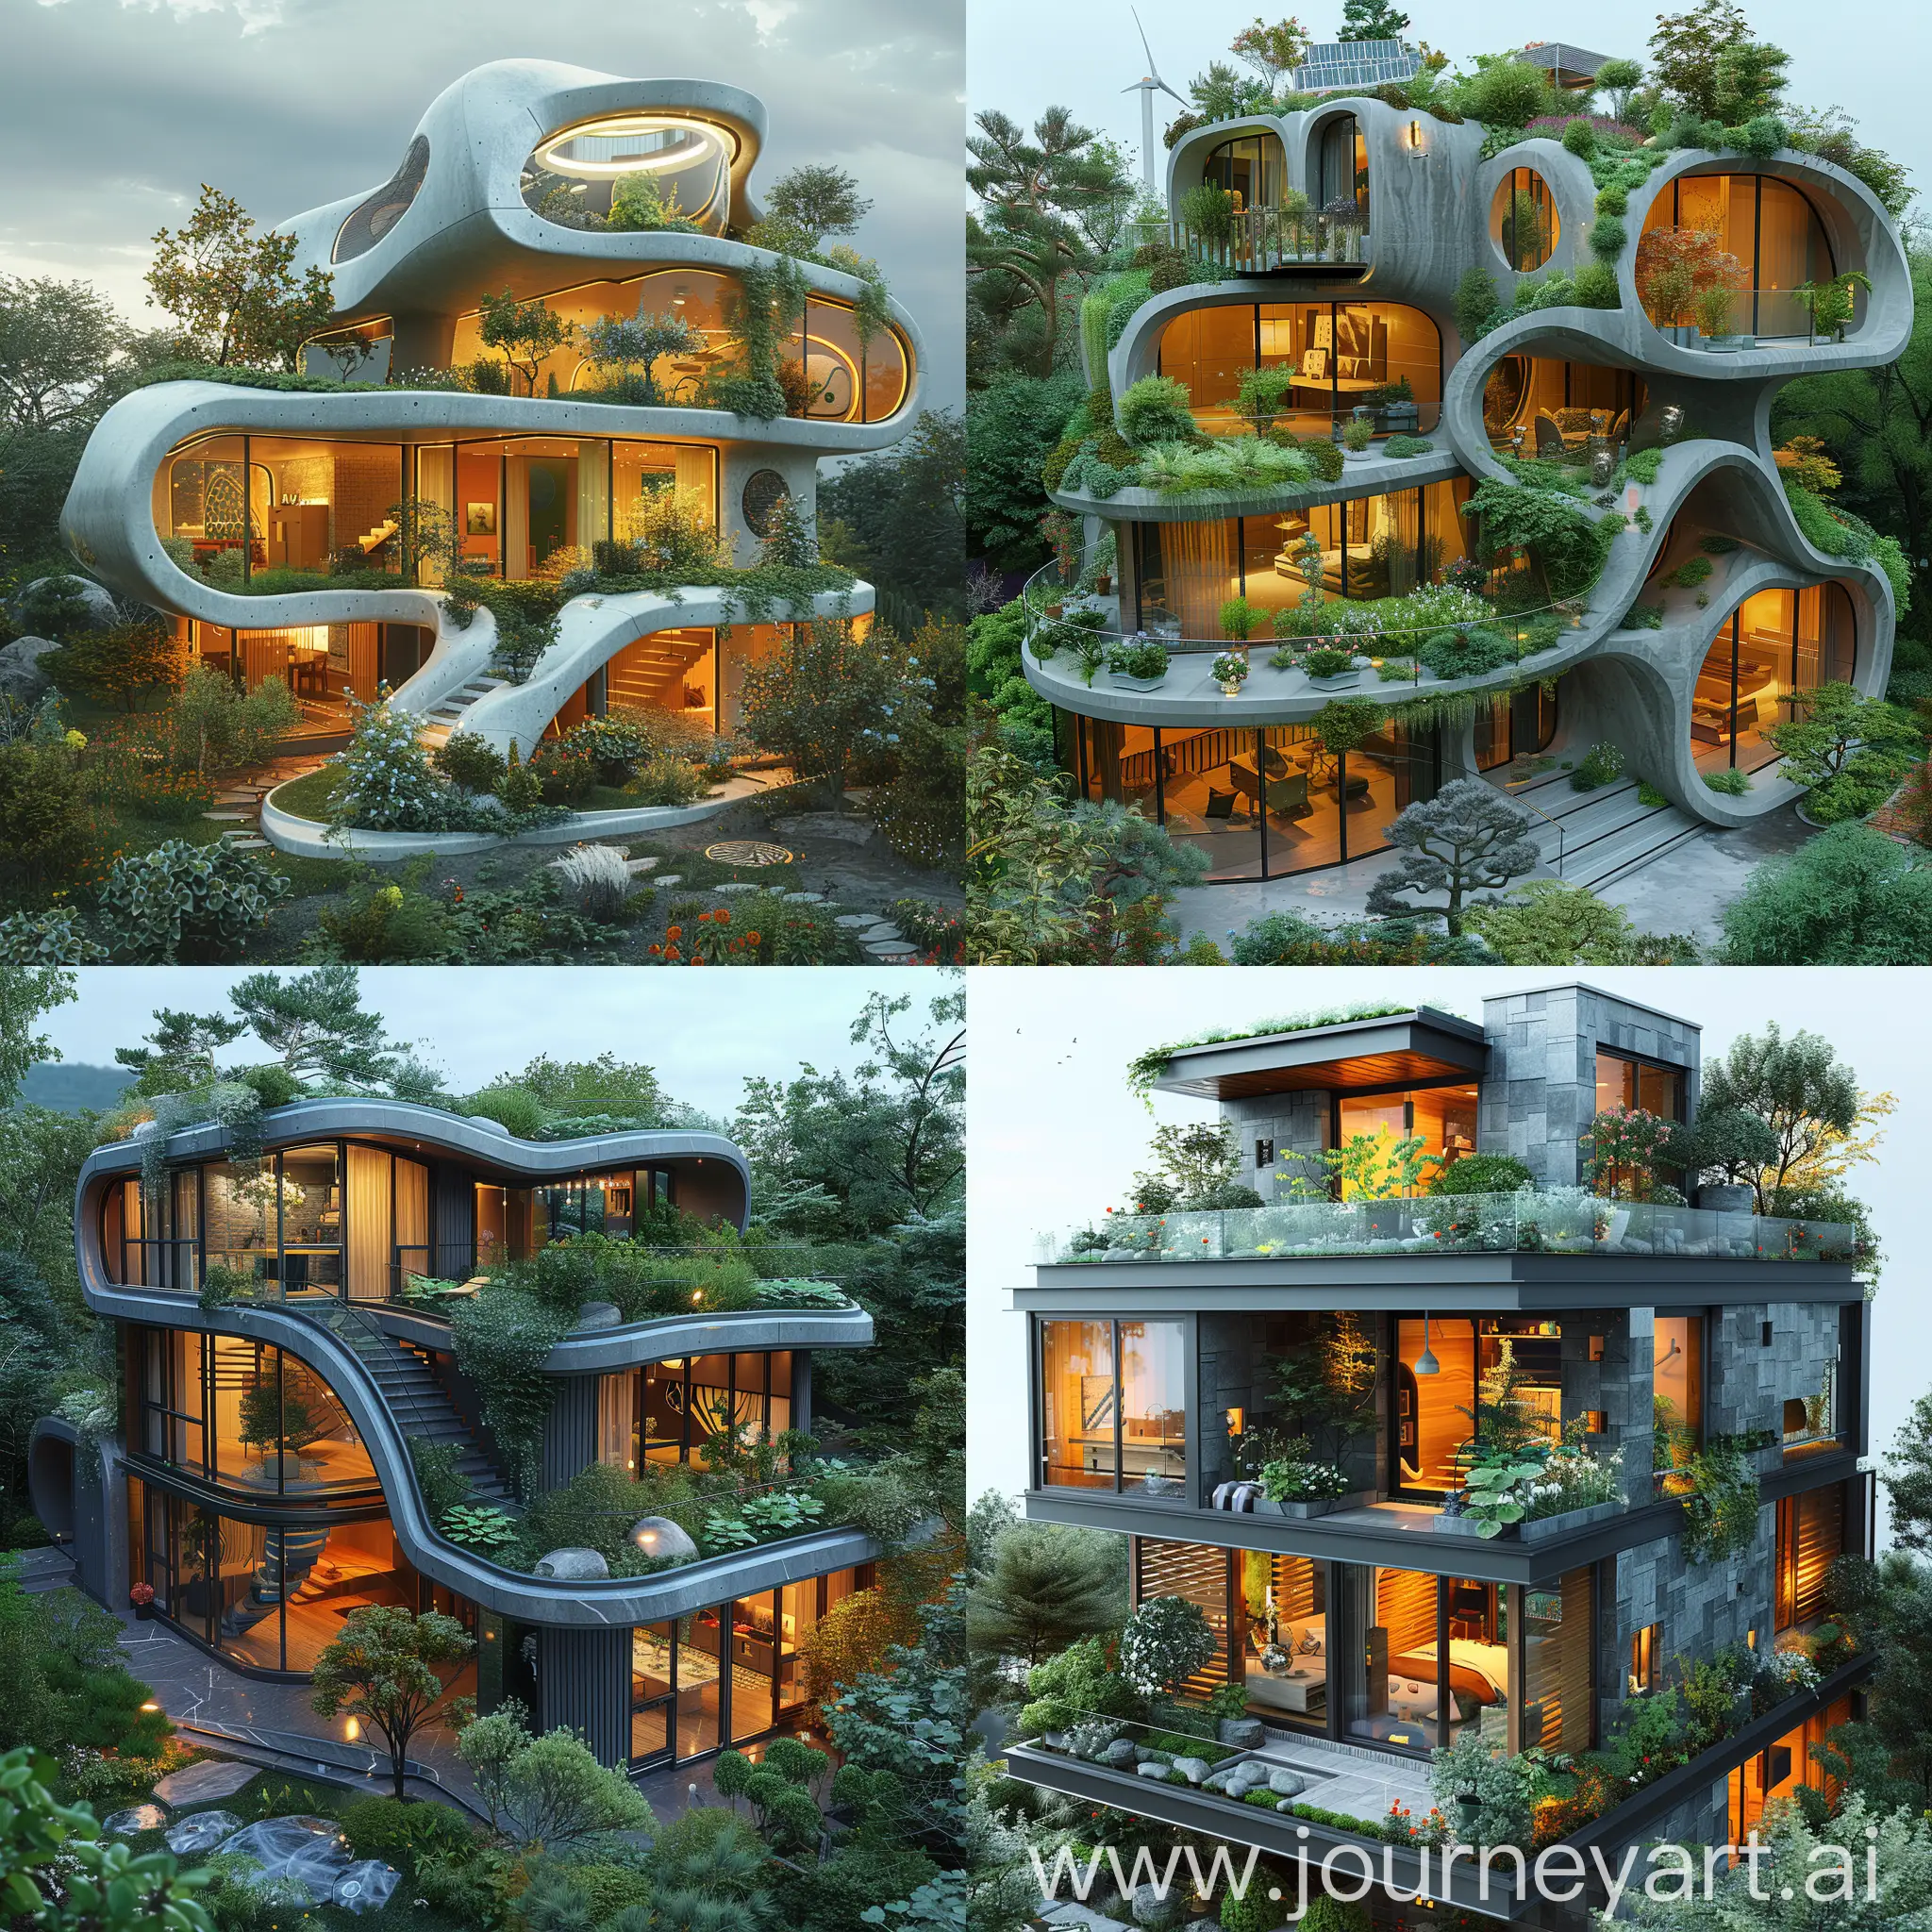 Futuristic-EcoFriendly-Smart-Home-with-Sustainable-Technologies